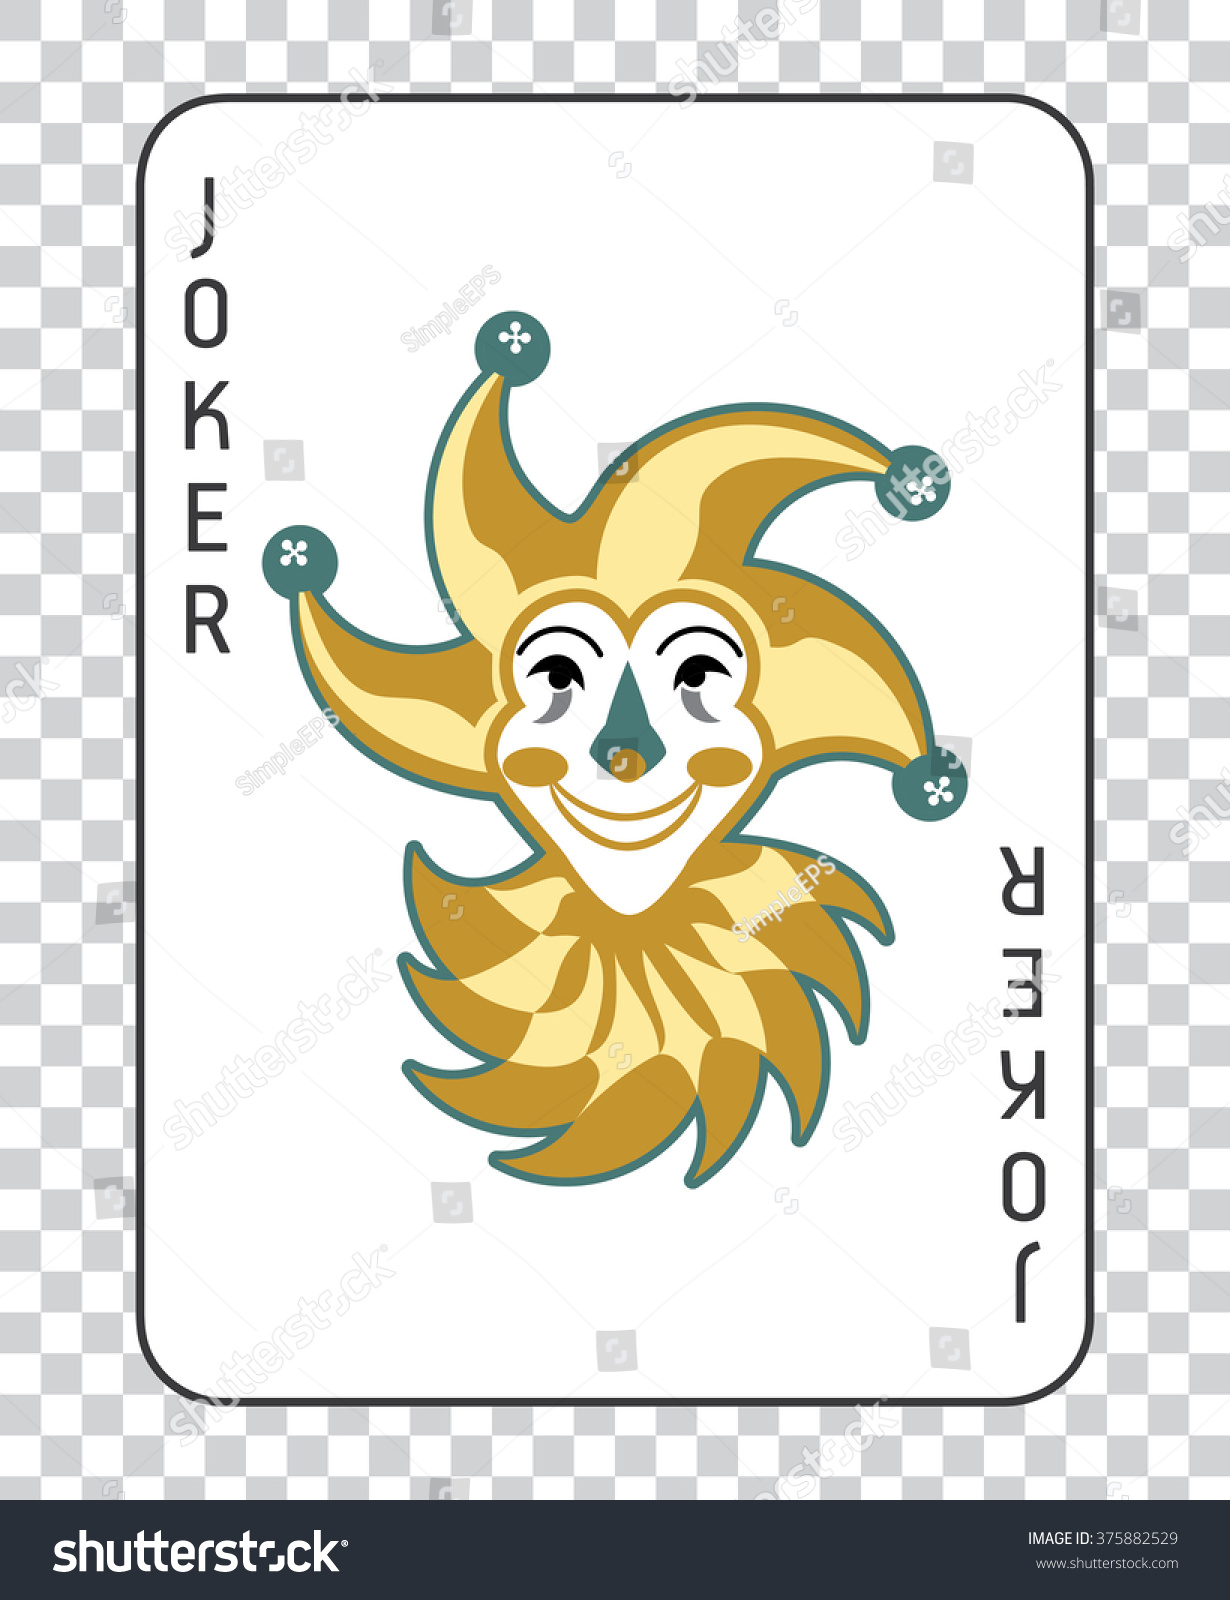 Playing Cards With The Joker From A Deck Of Playing Cards. Vector ...